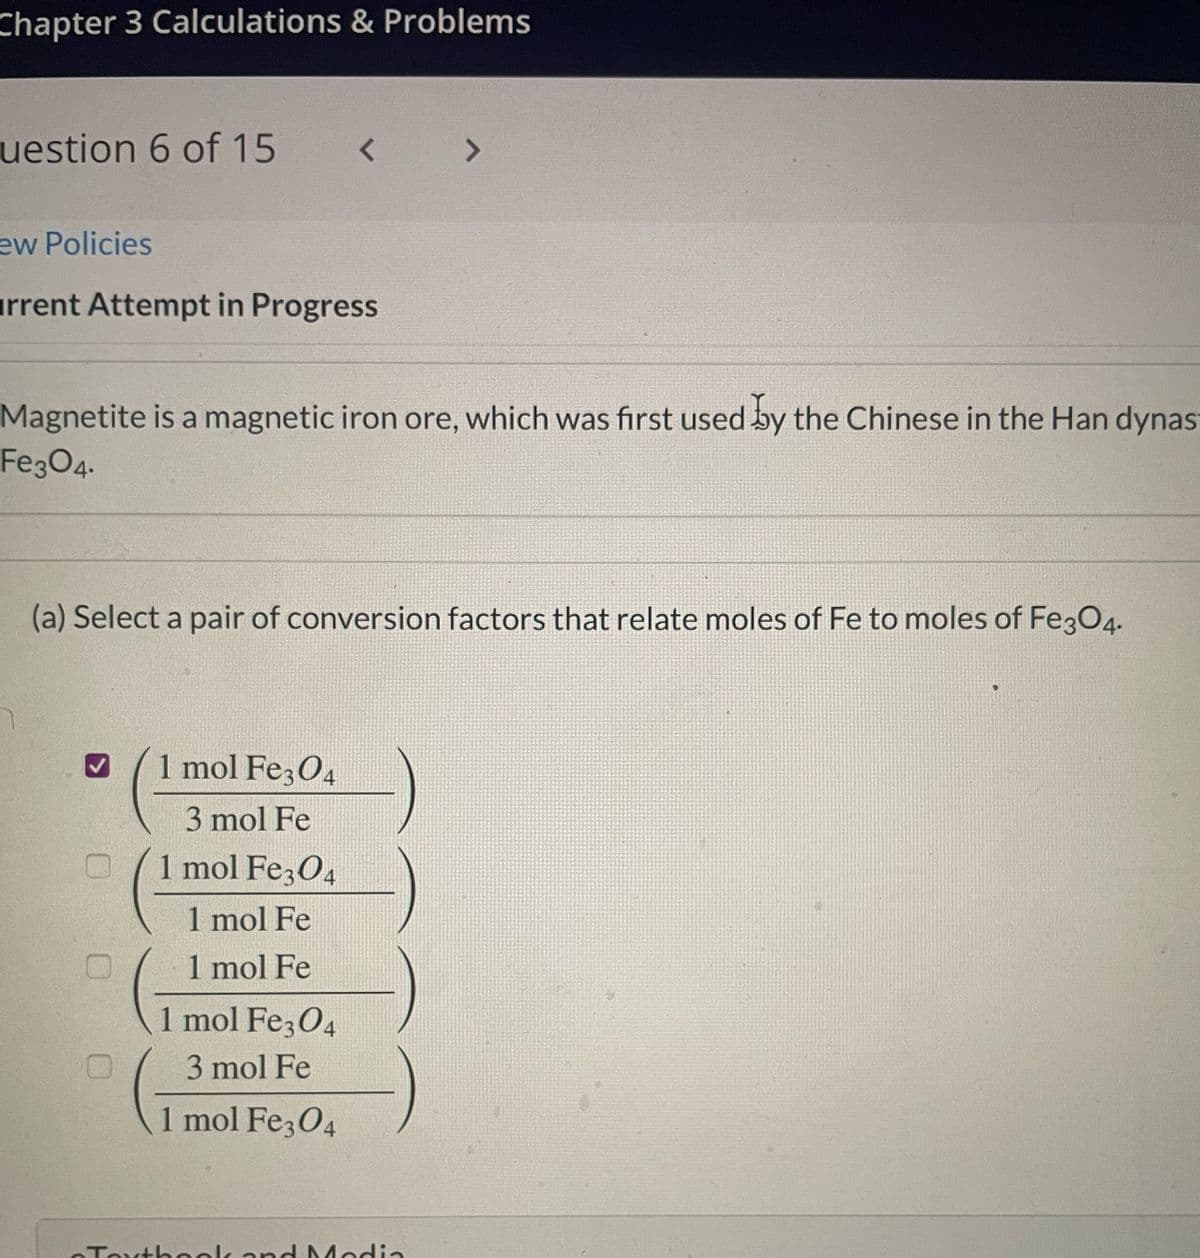 Chapter 3 Calculations & Problems
uestion 6 of 15
ew Policies
rrent Attempt in Progress
<
Magnetite is a magnetic iron ore, which was first used by the Chinese in the Han dynas
Fe3O4-
0 0 0
(a) Select a pair of conversion factors that relate moles of Fe to moles of Fe3O4.
1 mol Fe3O4
3 mol Fe
1 mol Fe3O4
1 mol Fe
1 mol Fe
1 mol Fe3O4
3 mol Fe
1 mol Fe3O4
7
Textbook and Modia